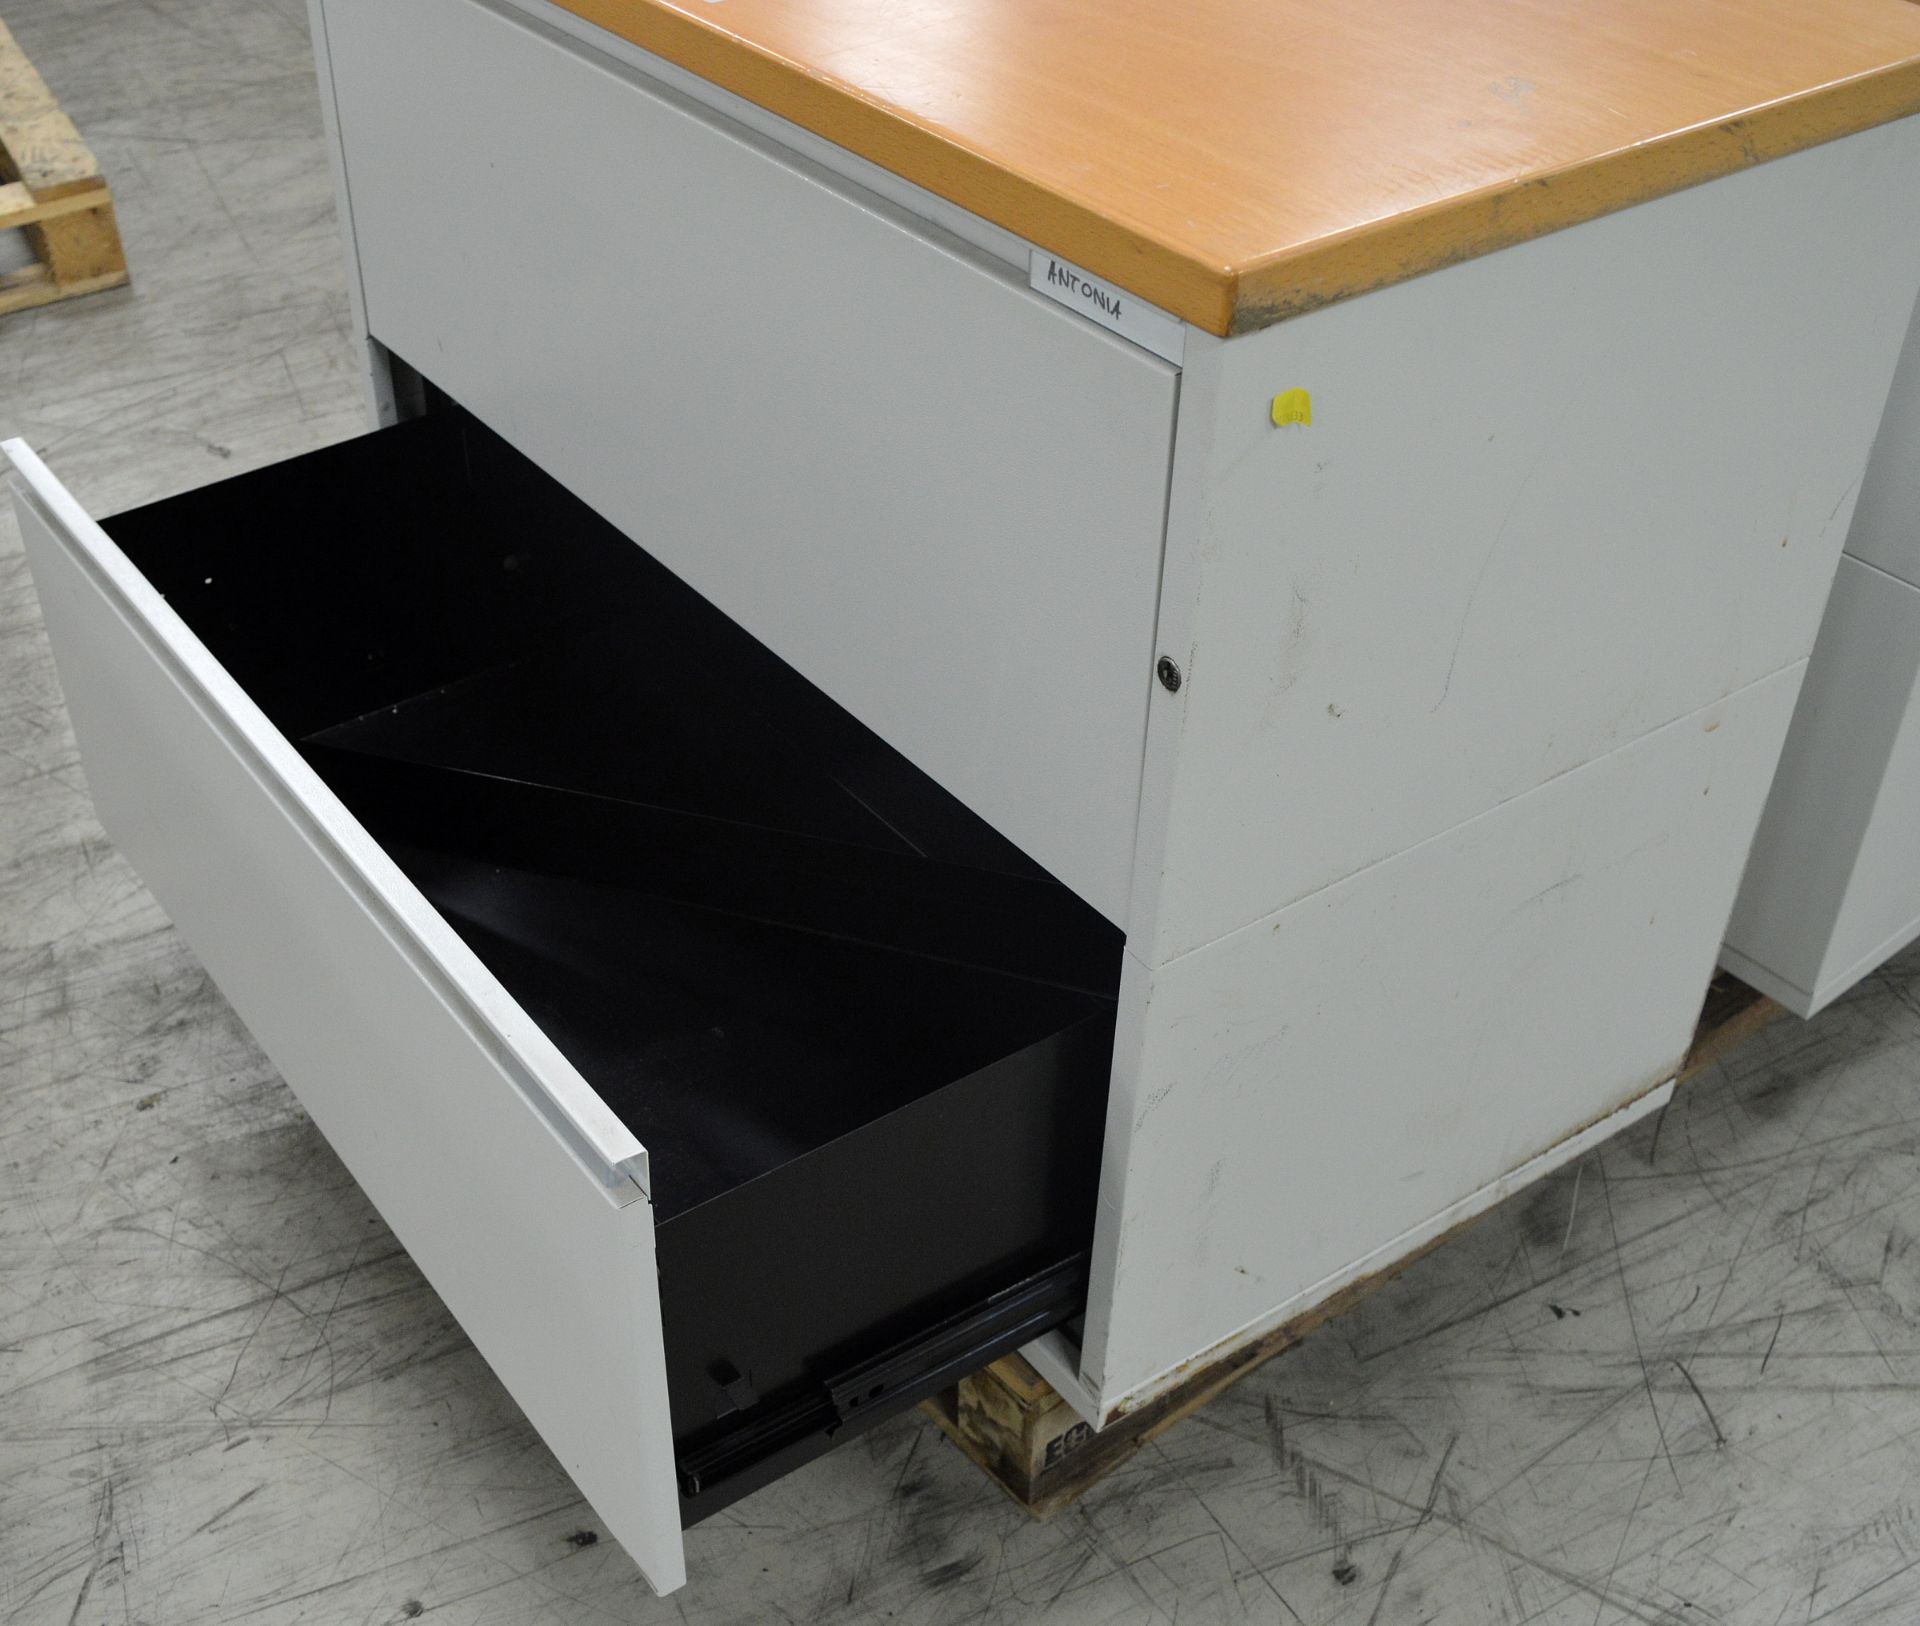 Metal 2-Drawer Hanging Filing Cabinet - W 920mm x D 520mm x H 720mm - Image 3 of 3